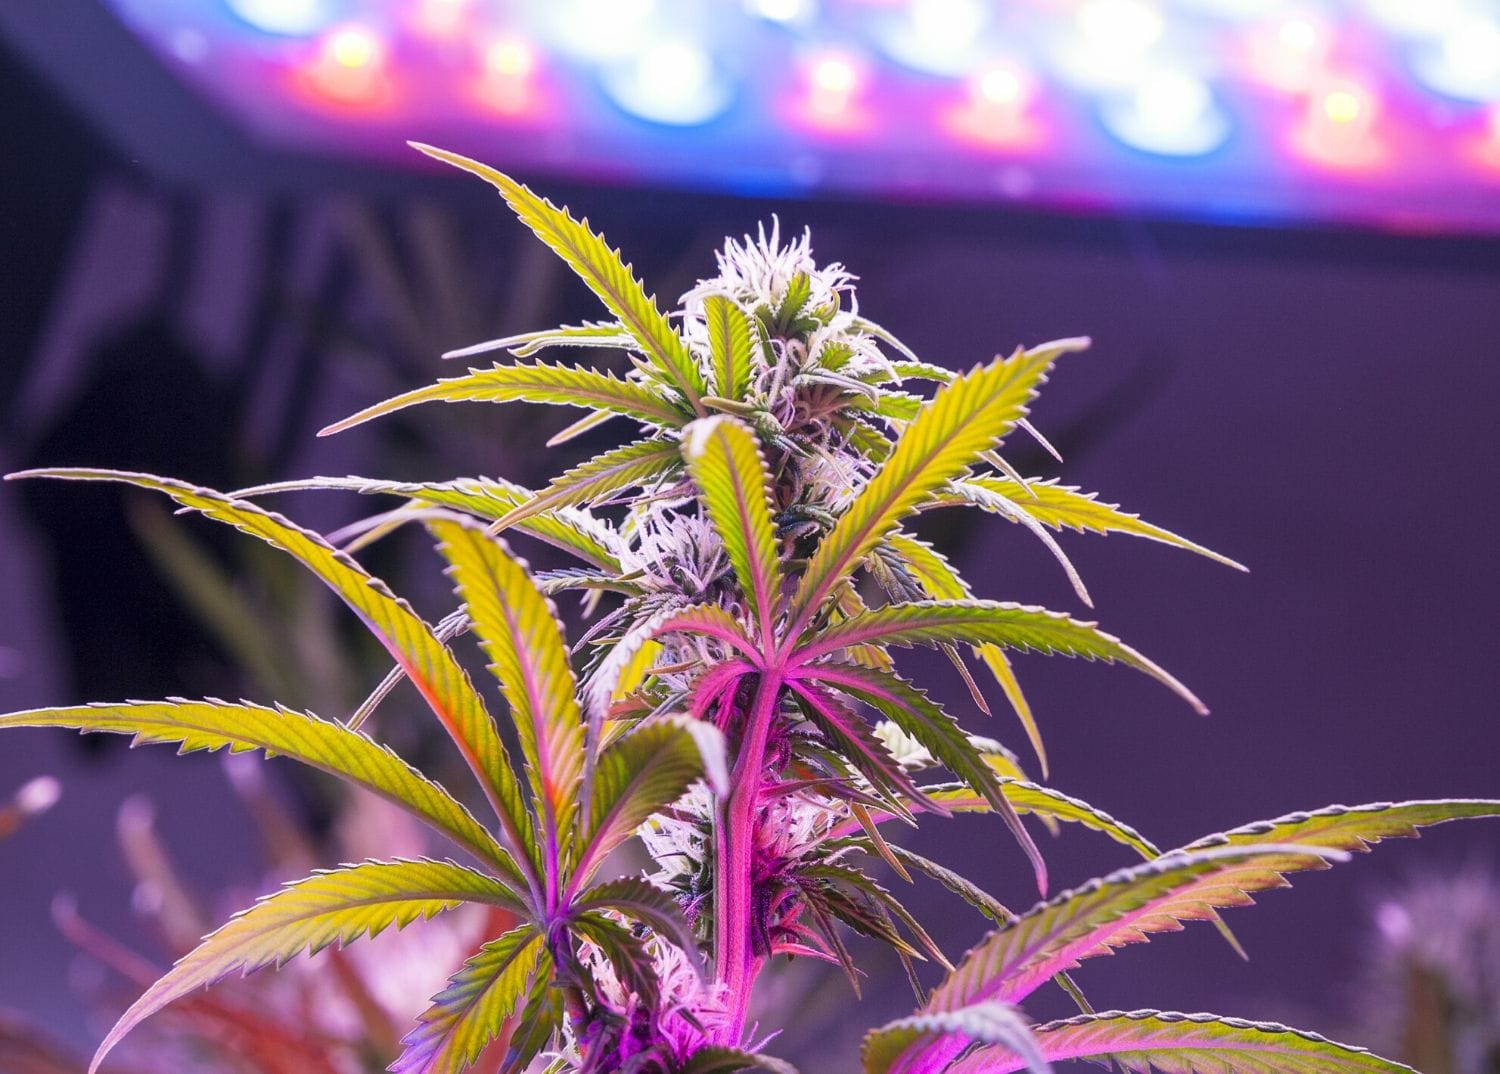 healthy plant thriving under adjustable grow lights